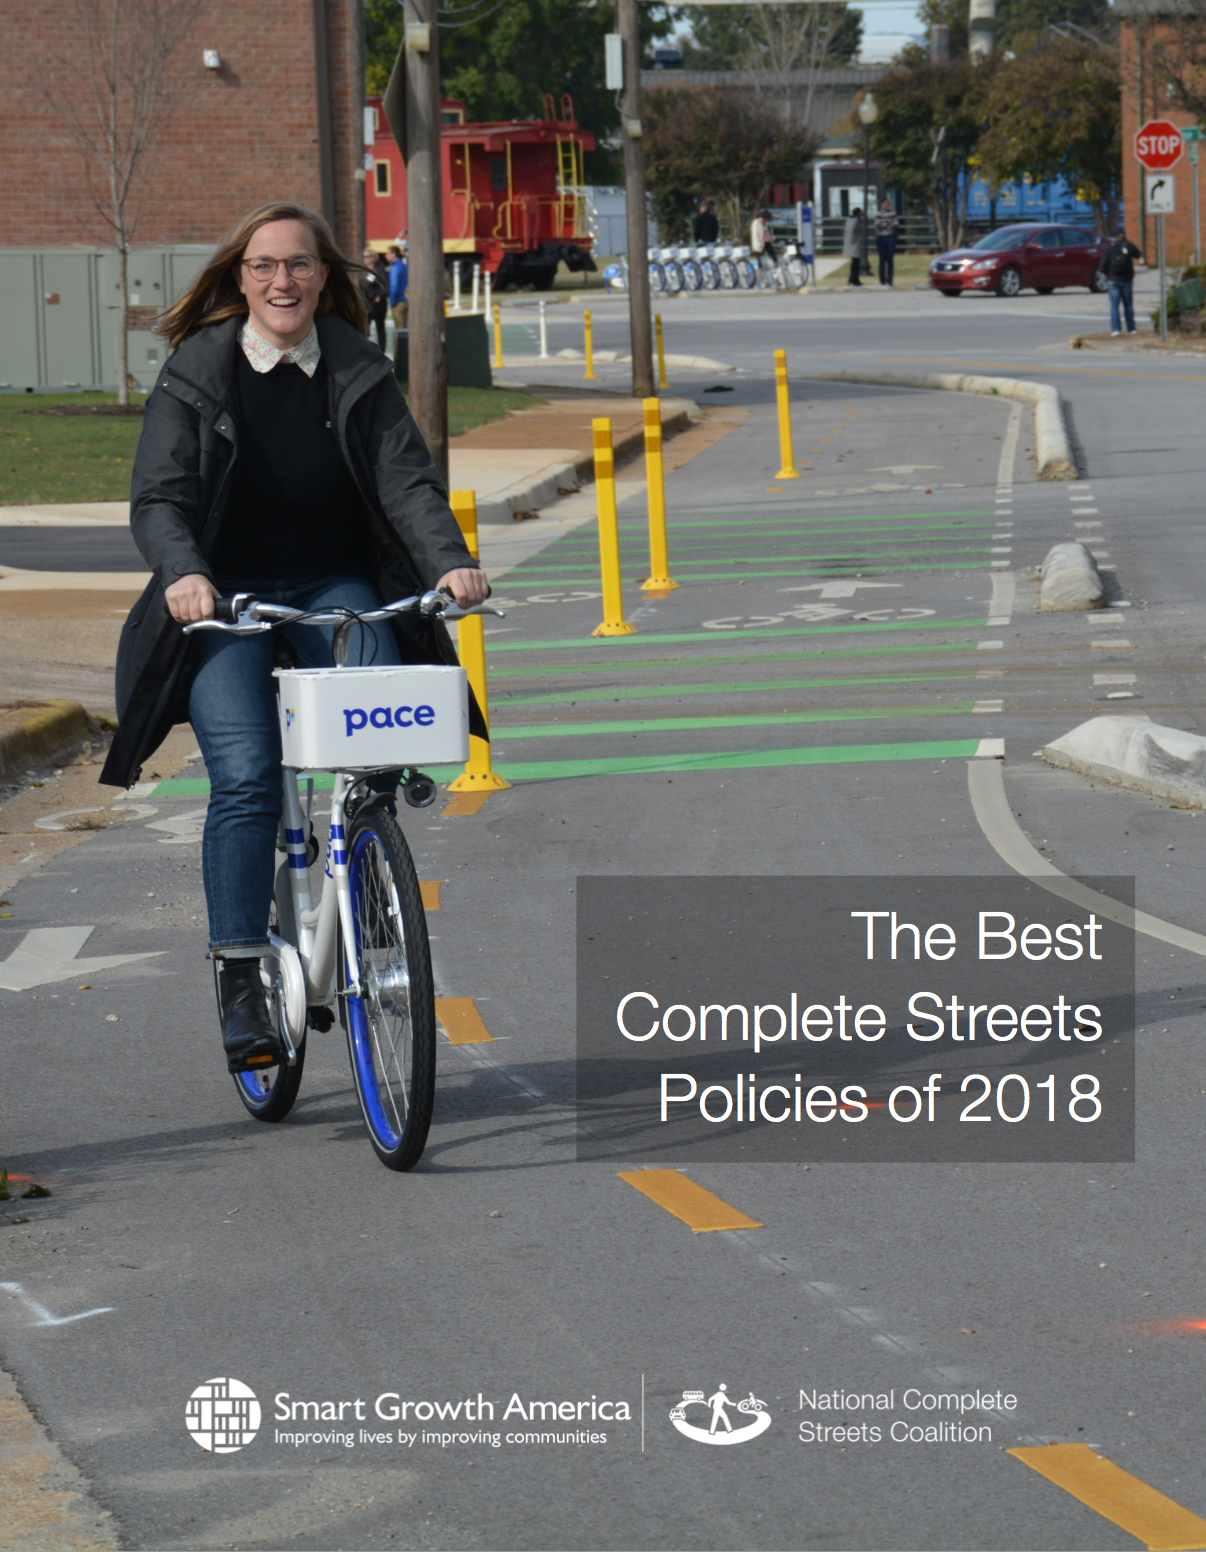 The Best Complete Streets Policies of 2018